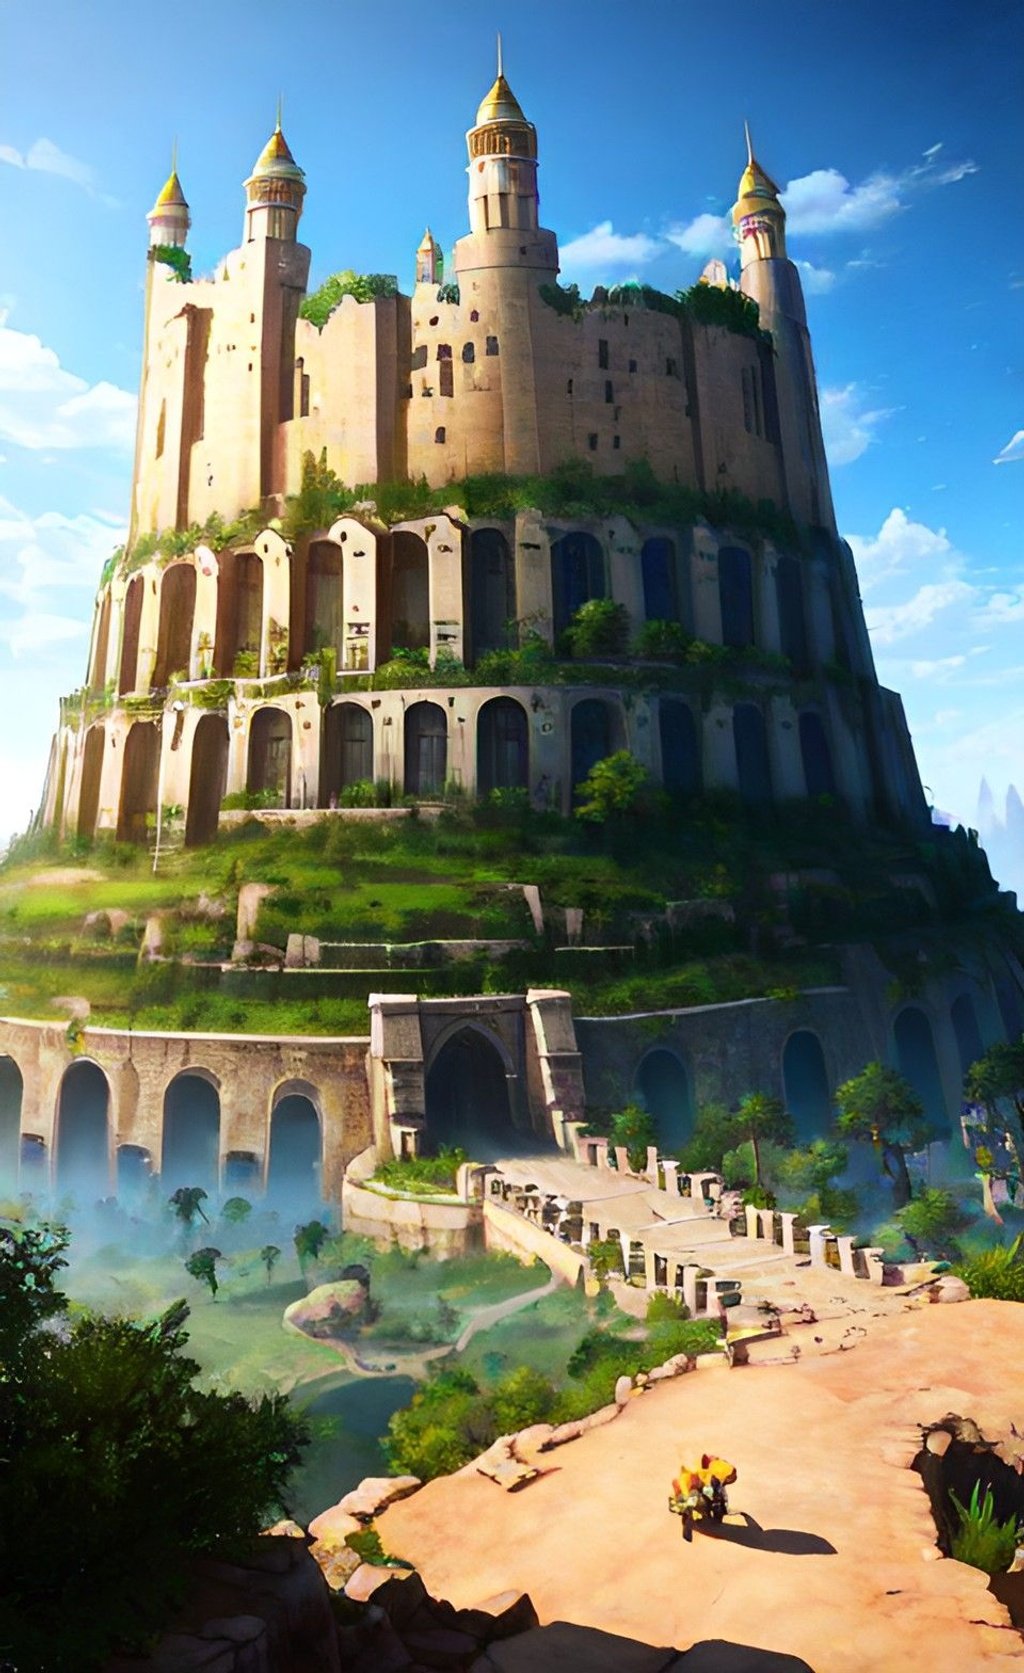 Prompt: "Embark on an immersive midjourney where you step into the breathtaking world of the Tower of Babel, recreated with hyper-realistic visuals and unparalleled detail using Unreal Engine. Discuss the astonishing realism that brings this legendary structure to life."